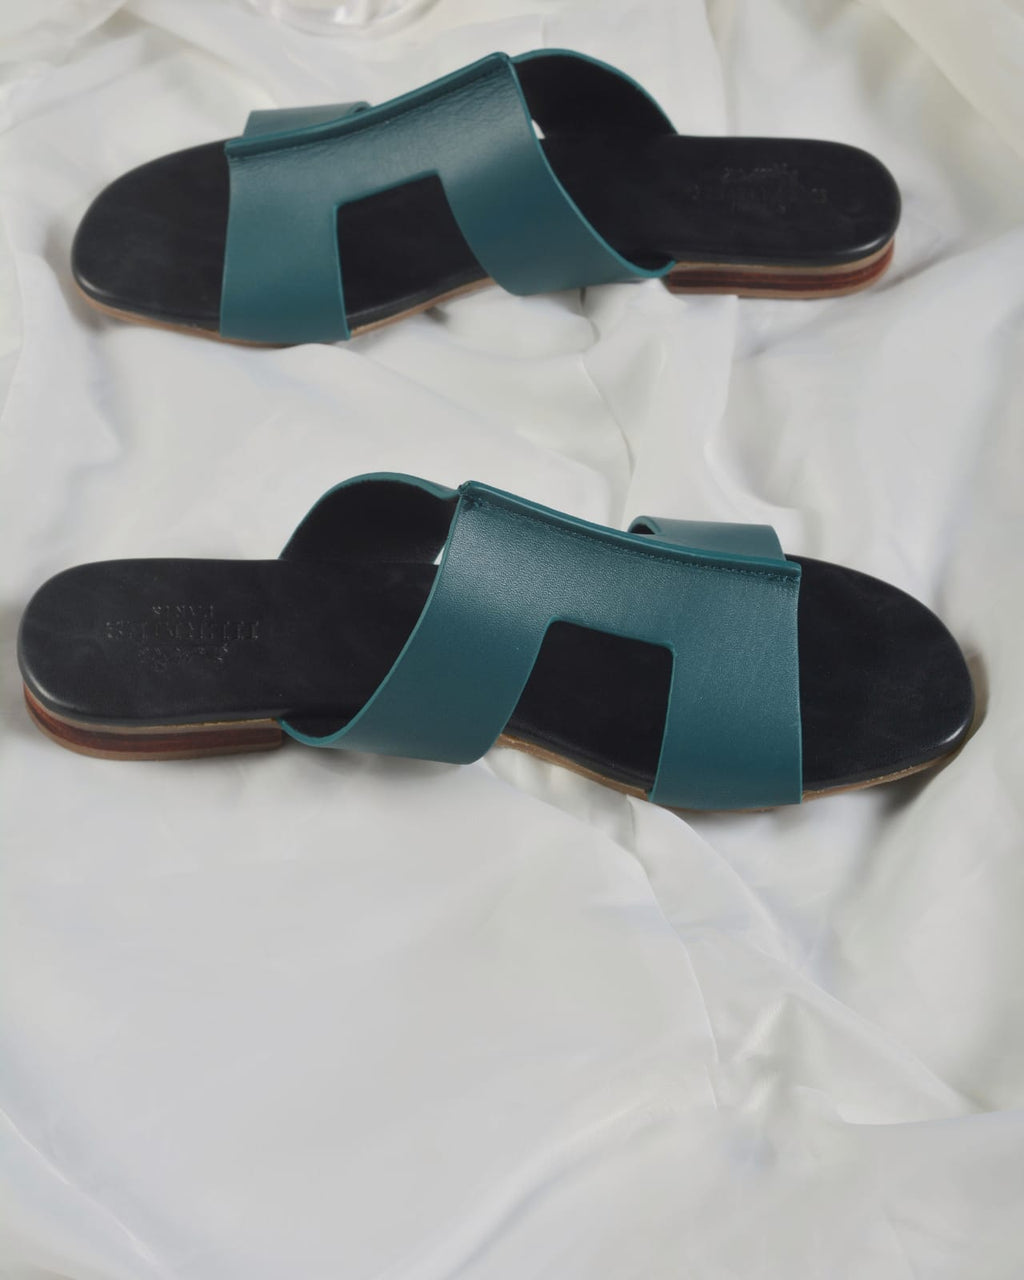 H CUT-OUT DUNES WOMEN SANDAL BLACK AND TEAL